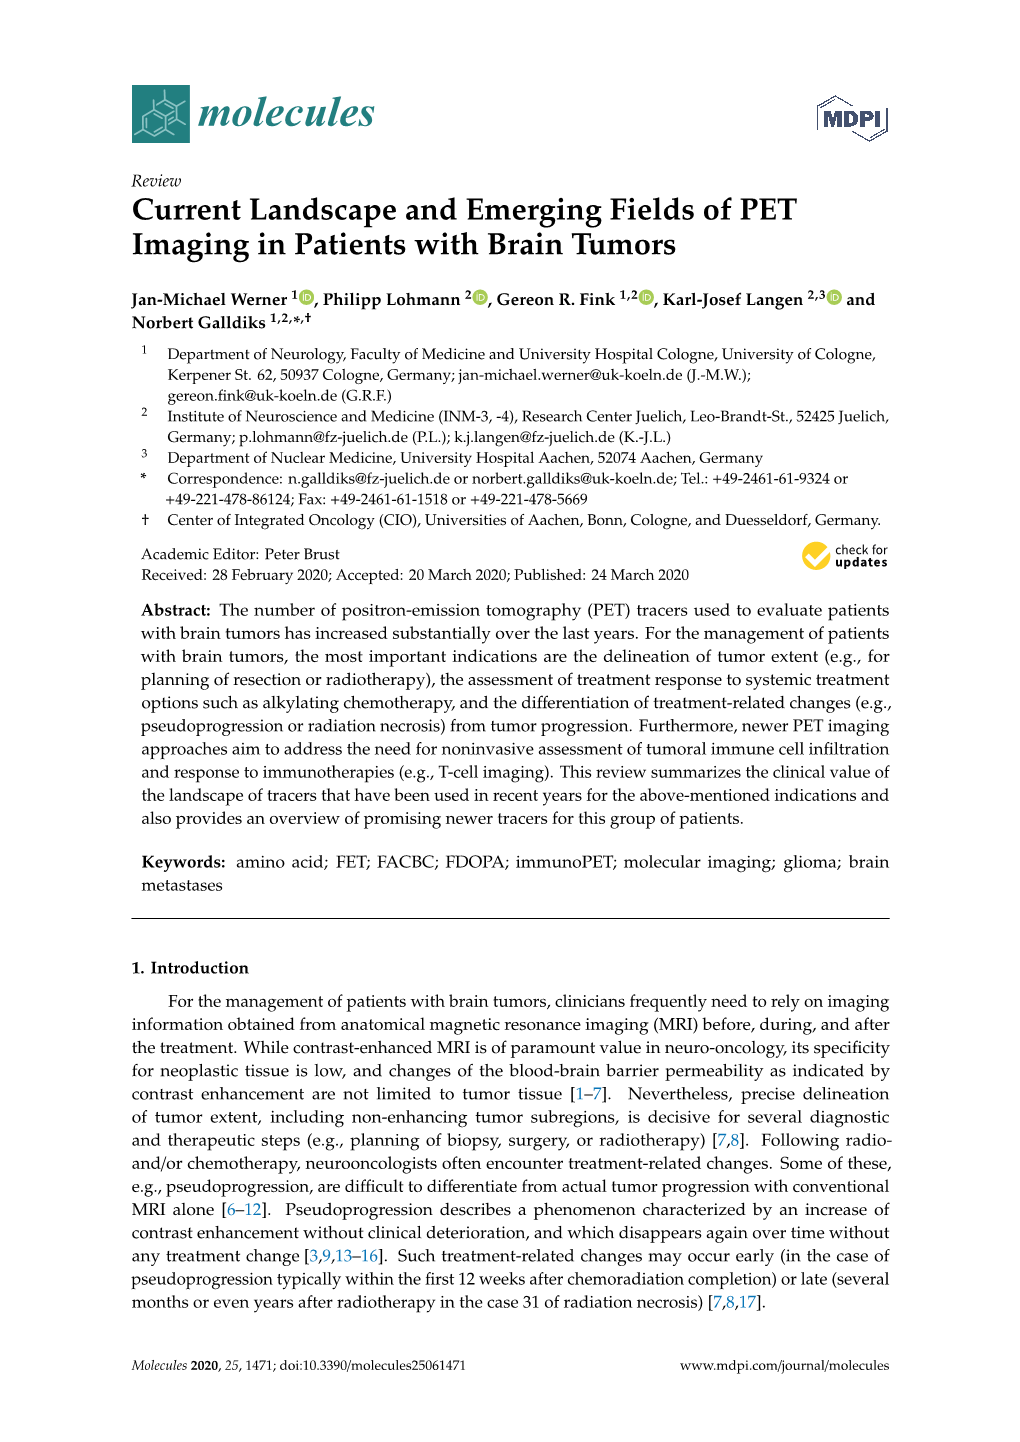 Current Landscape and Emerging Fields of PET Imaging in Patients with Brain Tumors